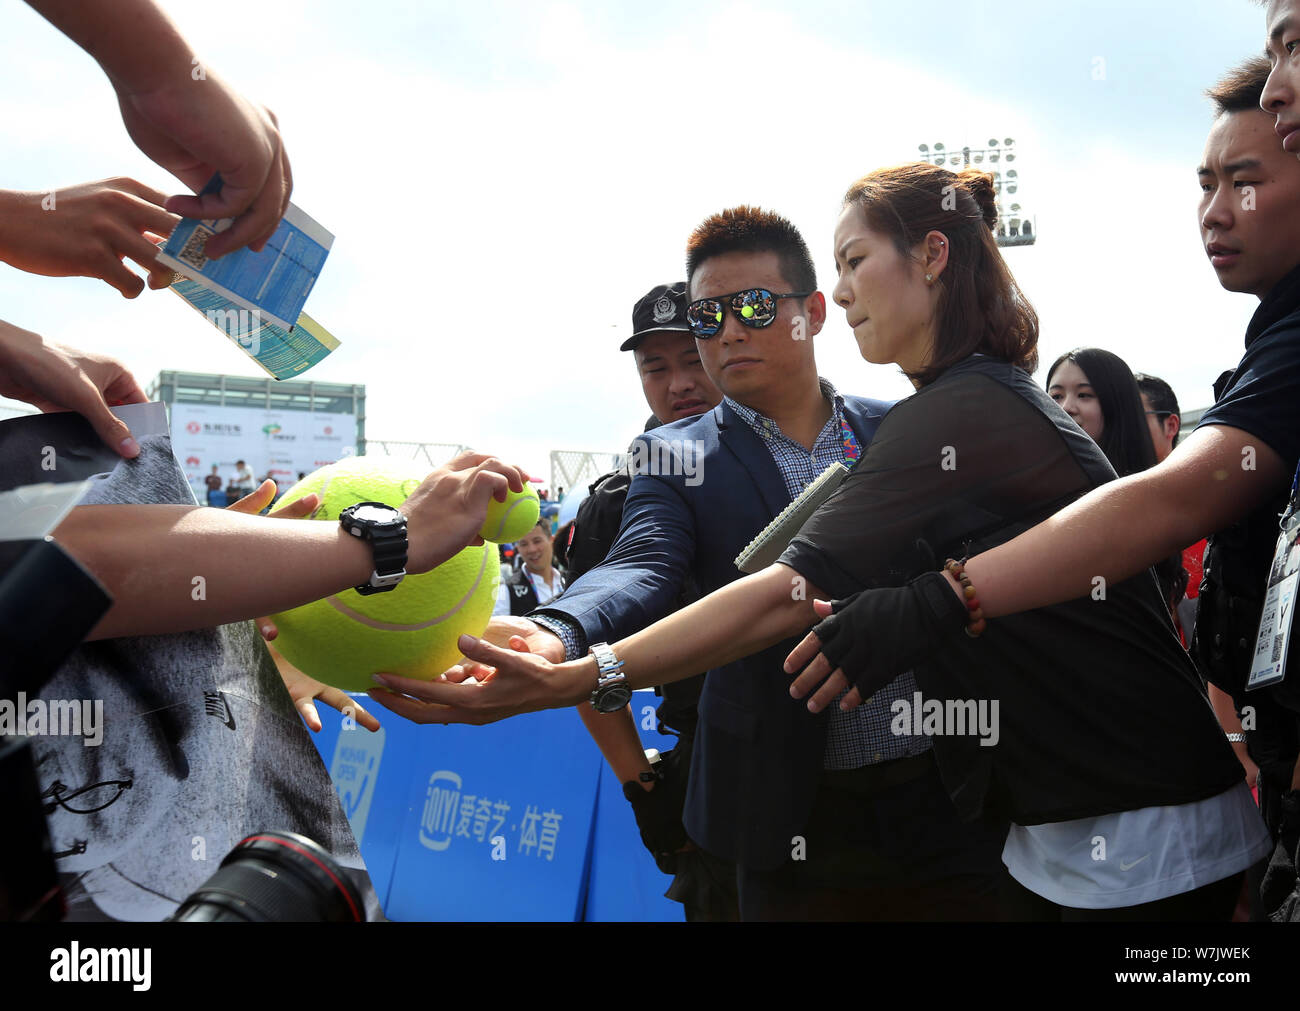 Chinese two-time Grand Slam champion Li Na, center, signs autographs for fans during the 2017 WTA Wuhan Open Project event in Wuhan city, central Chin Stock Photo